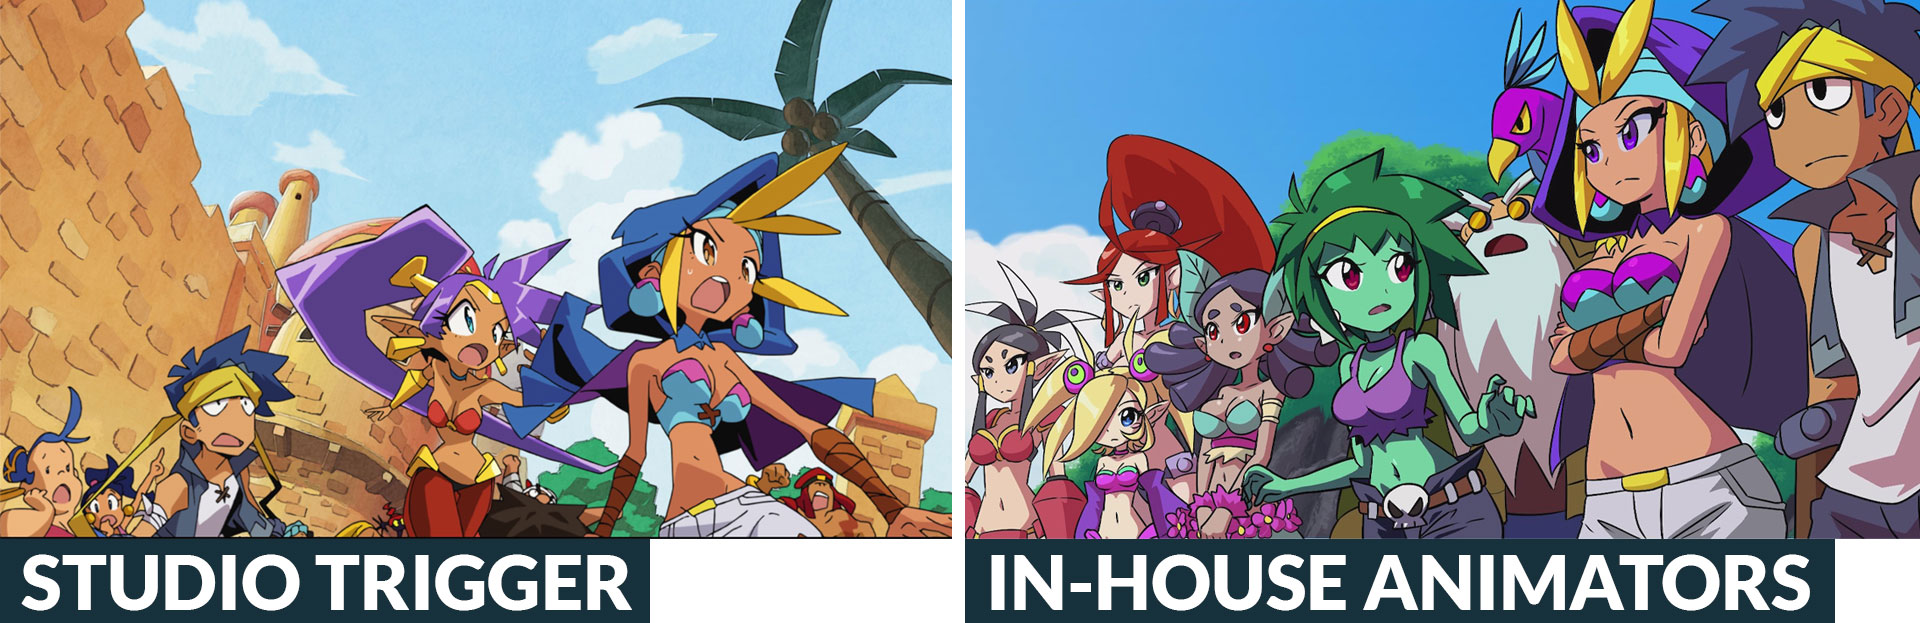 Shantae and the Seven Sirens - Animation Comparison